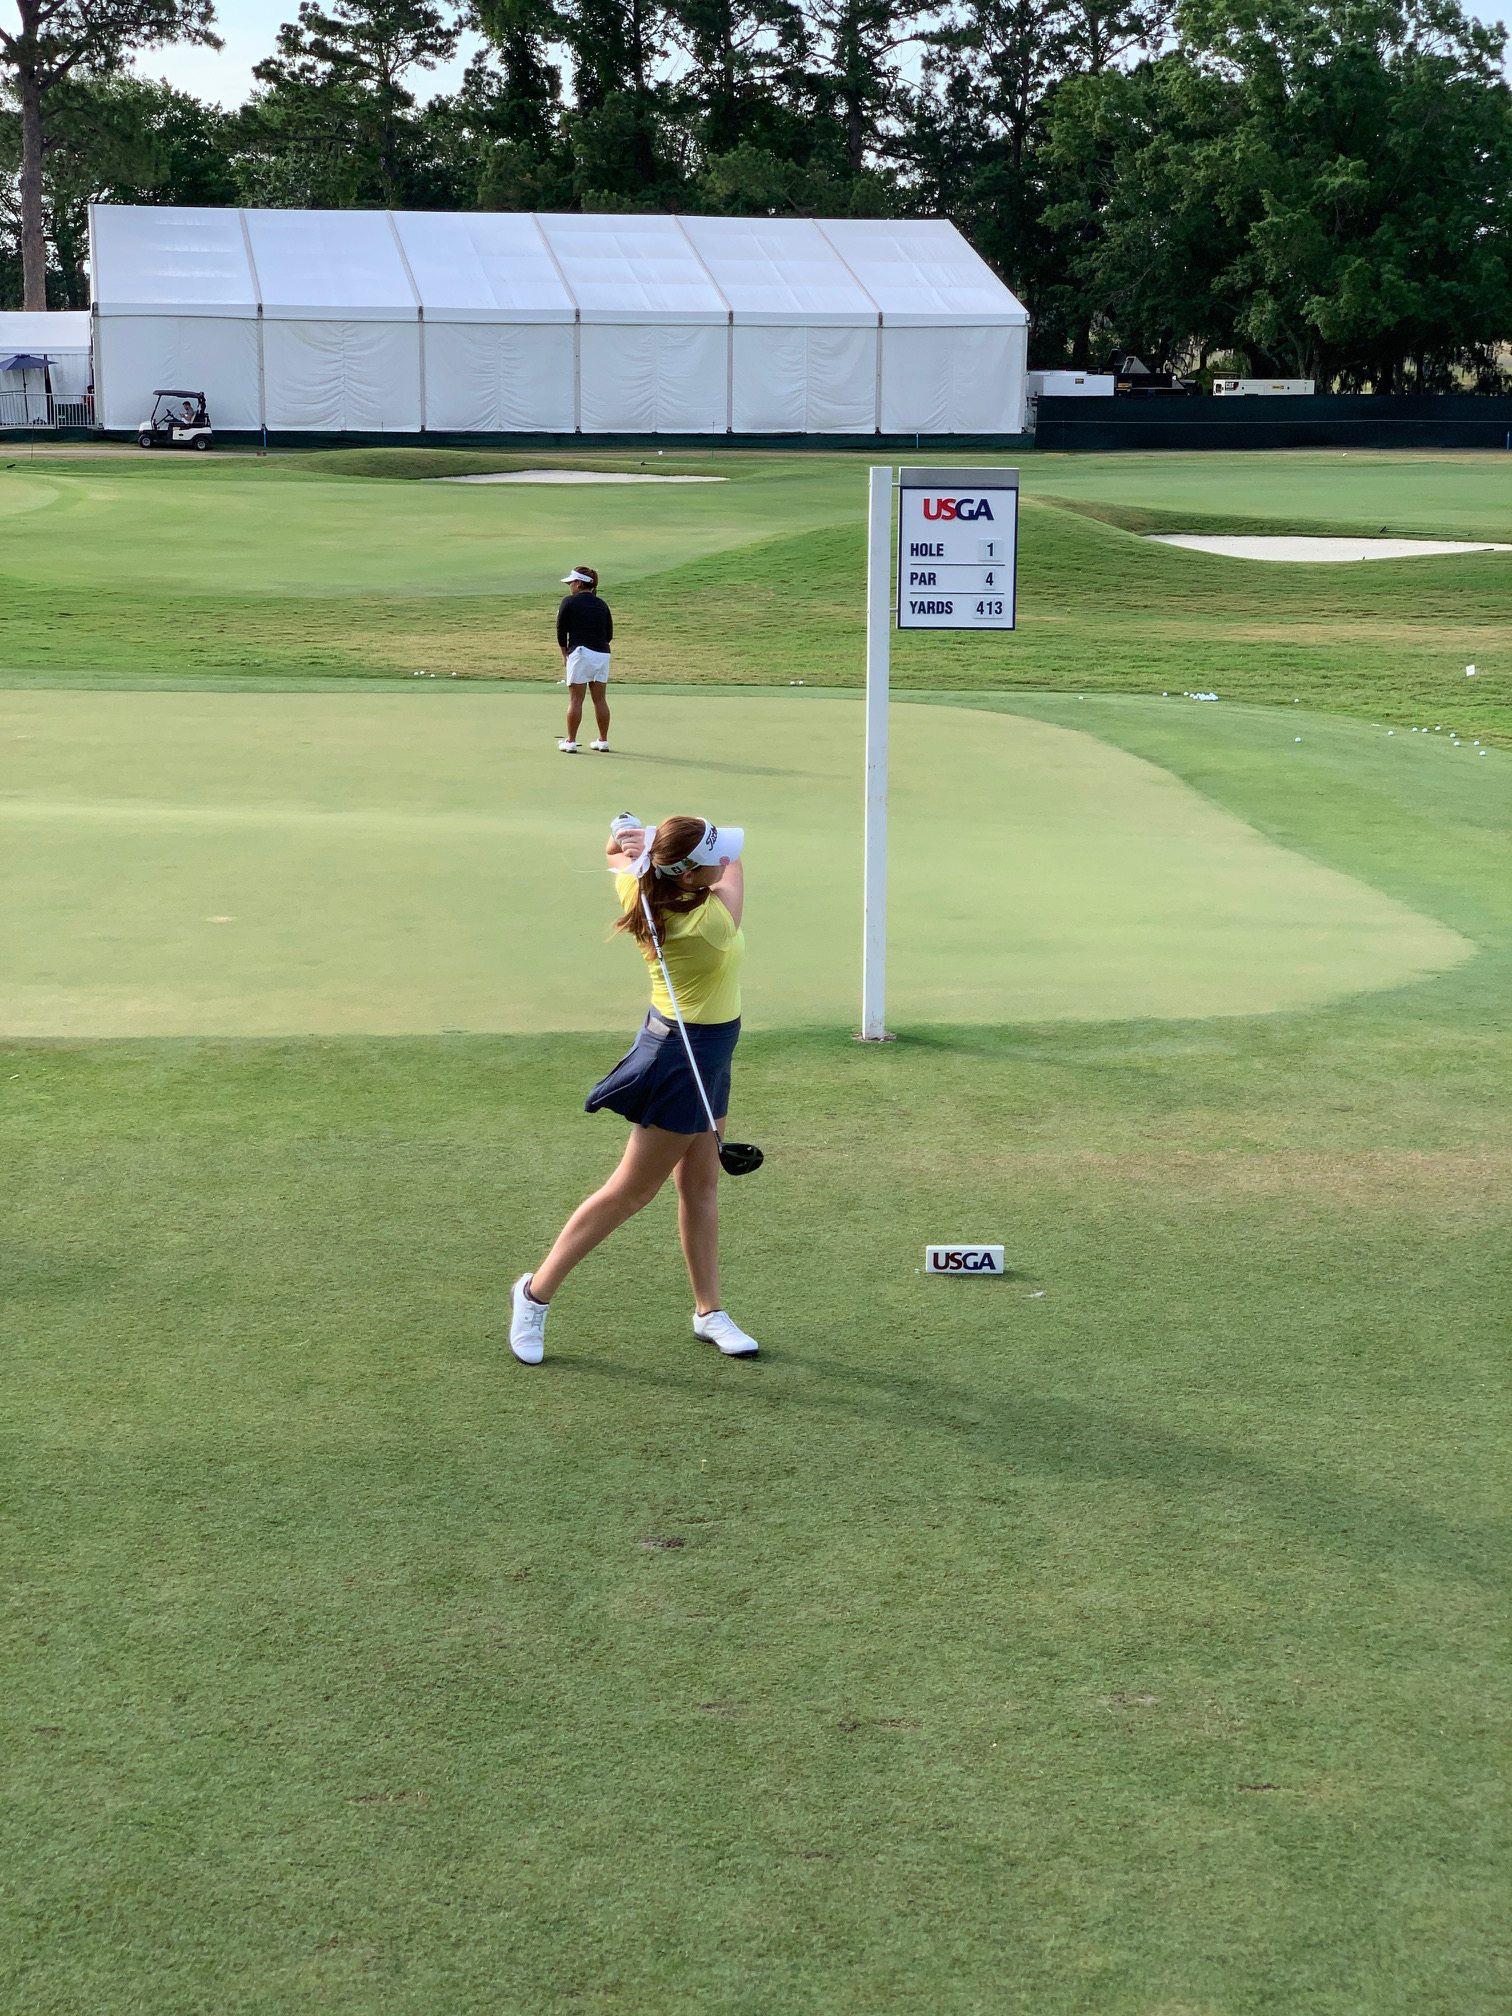 Reagan Zibilski competed in the U.S. Women's Open at just 15 years old.